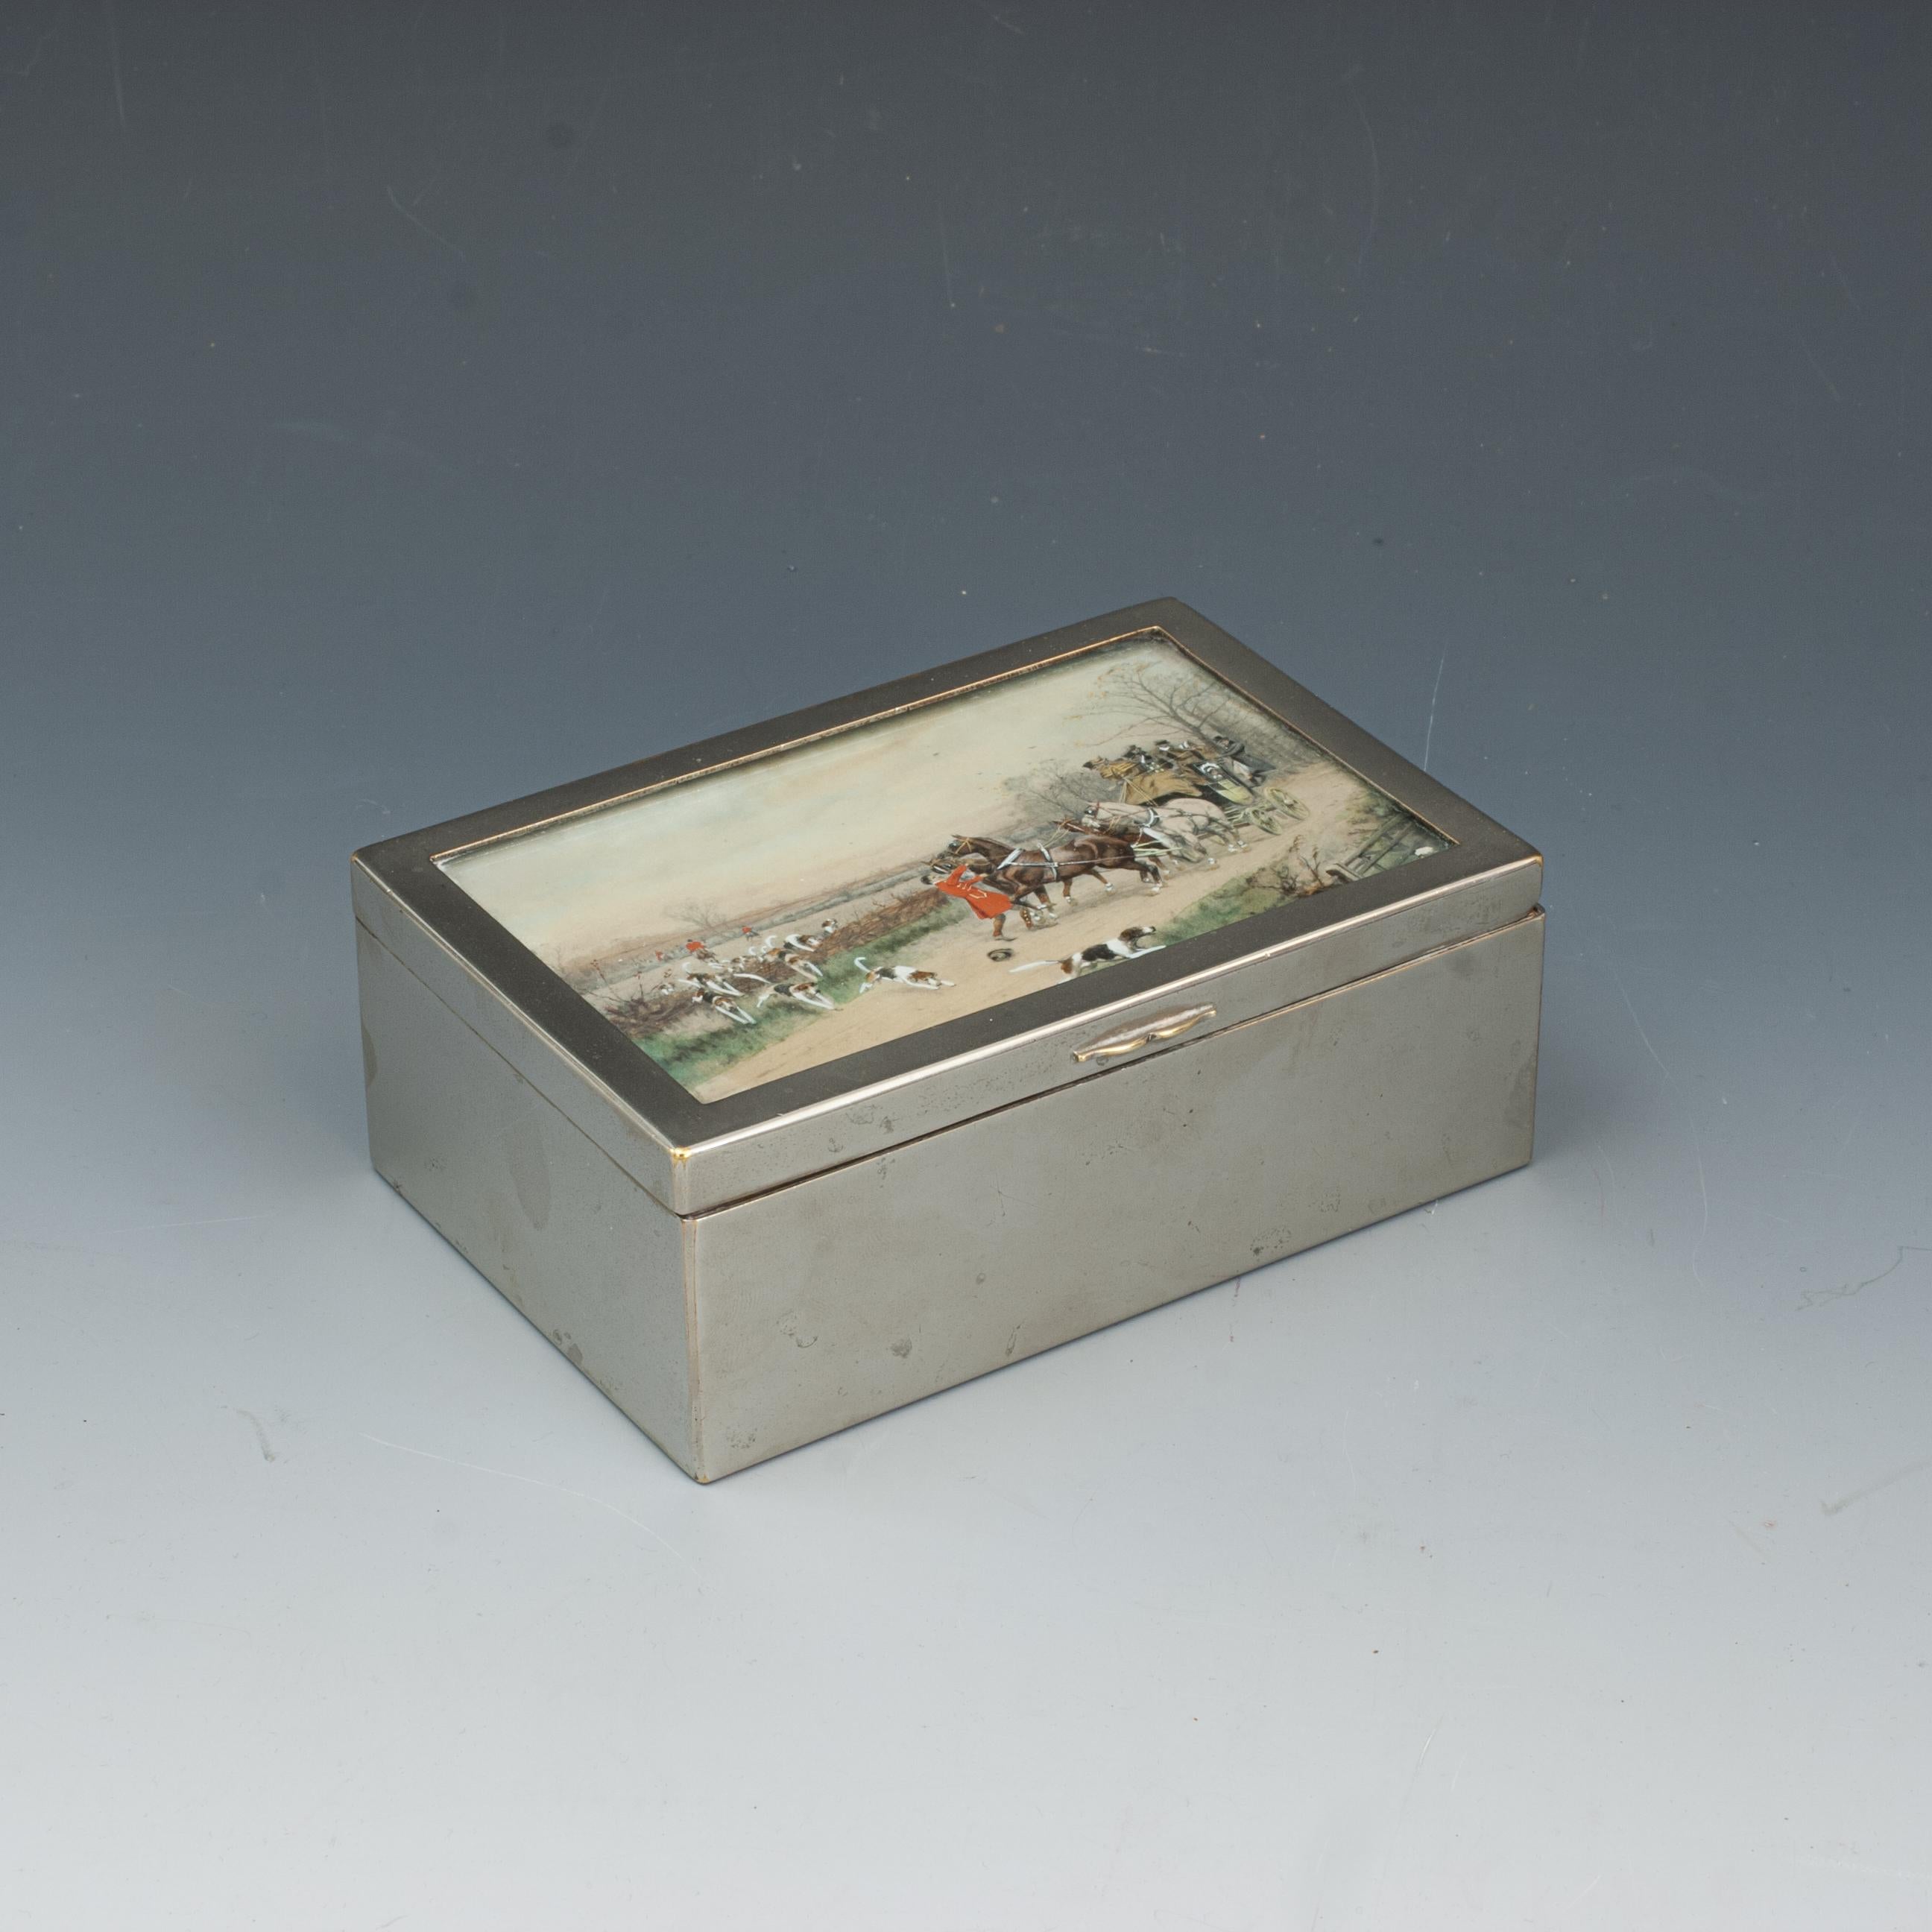 Antique Silver Plate Hunting Cigarette Case, Cigar Box.
A cigarette box with cedar wood lining and with silver plated frame. The lid containing a hand coloured hunting and coaching scene behind glass. Originally a smokers item but could easily be